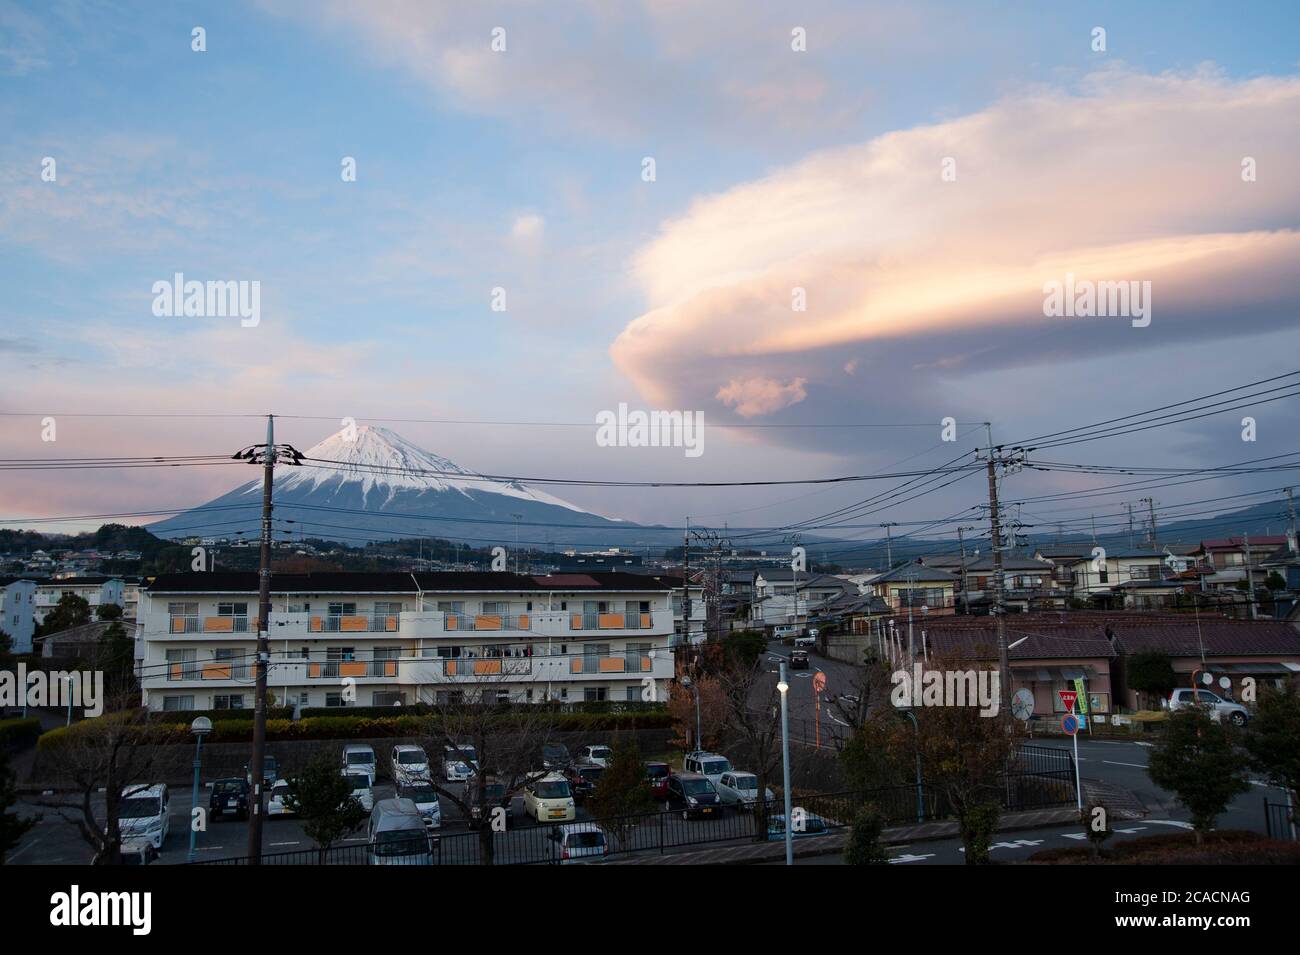 Mount Fuji in the afternoon with beautiful blue sky and clouds in Fuji city, Japan. Translation of Japanese text in English: Stop. Stock Photo